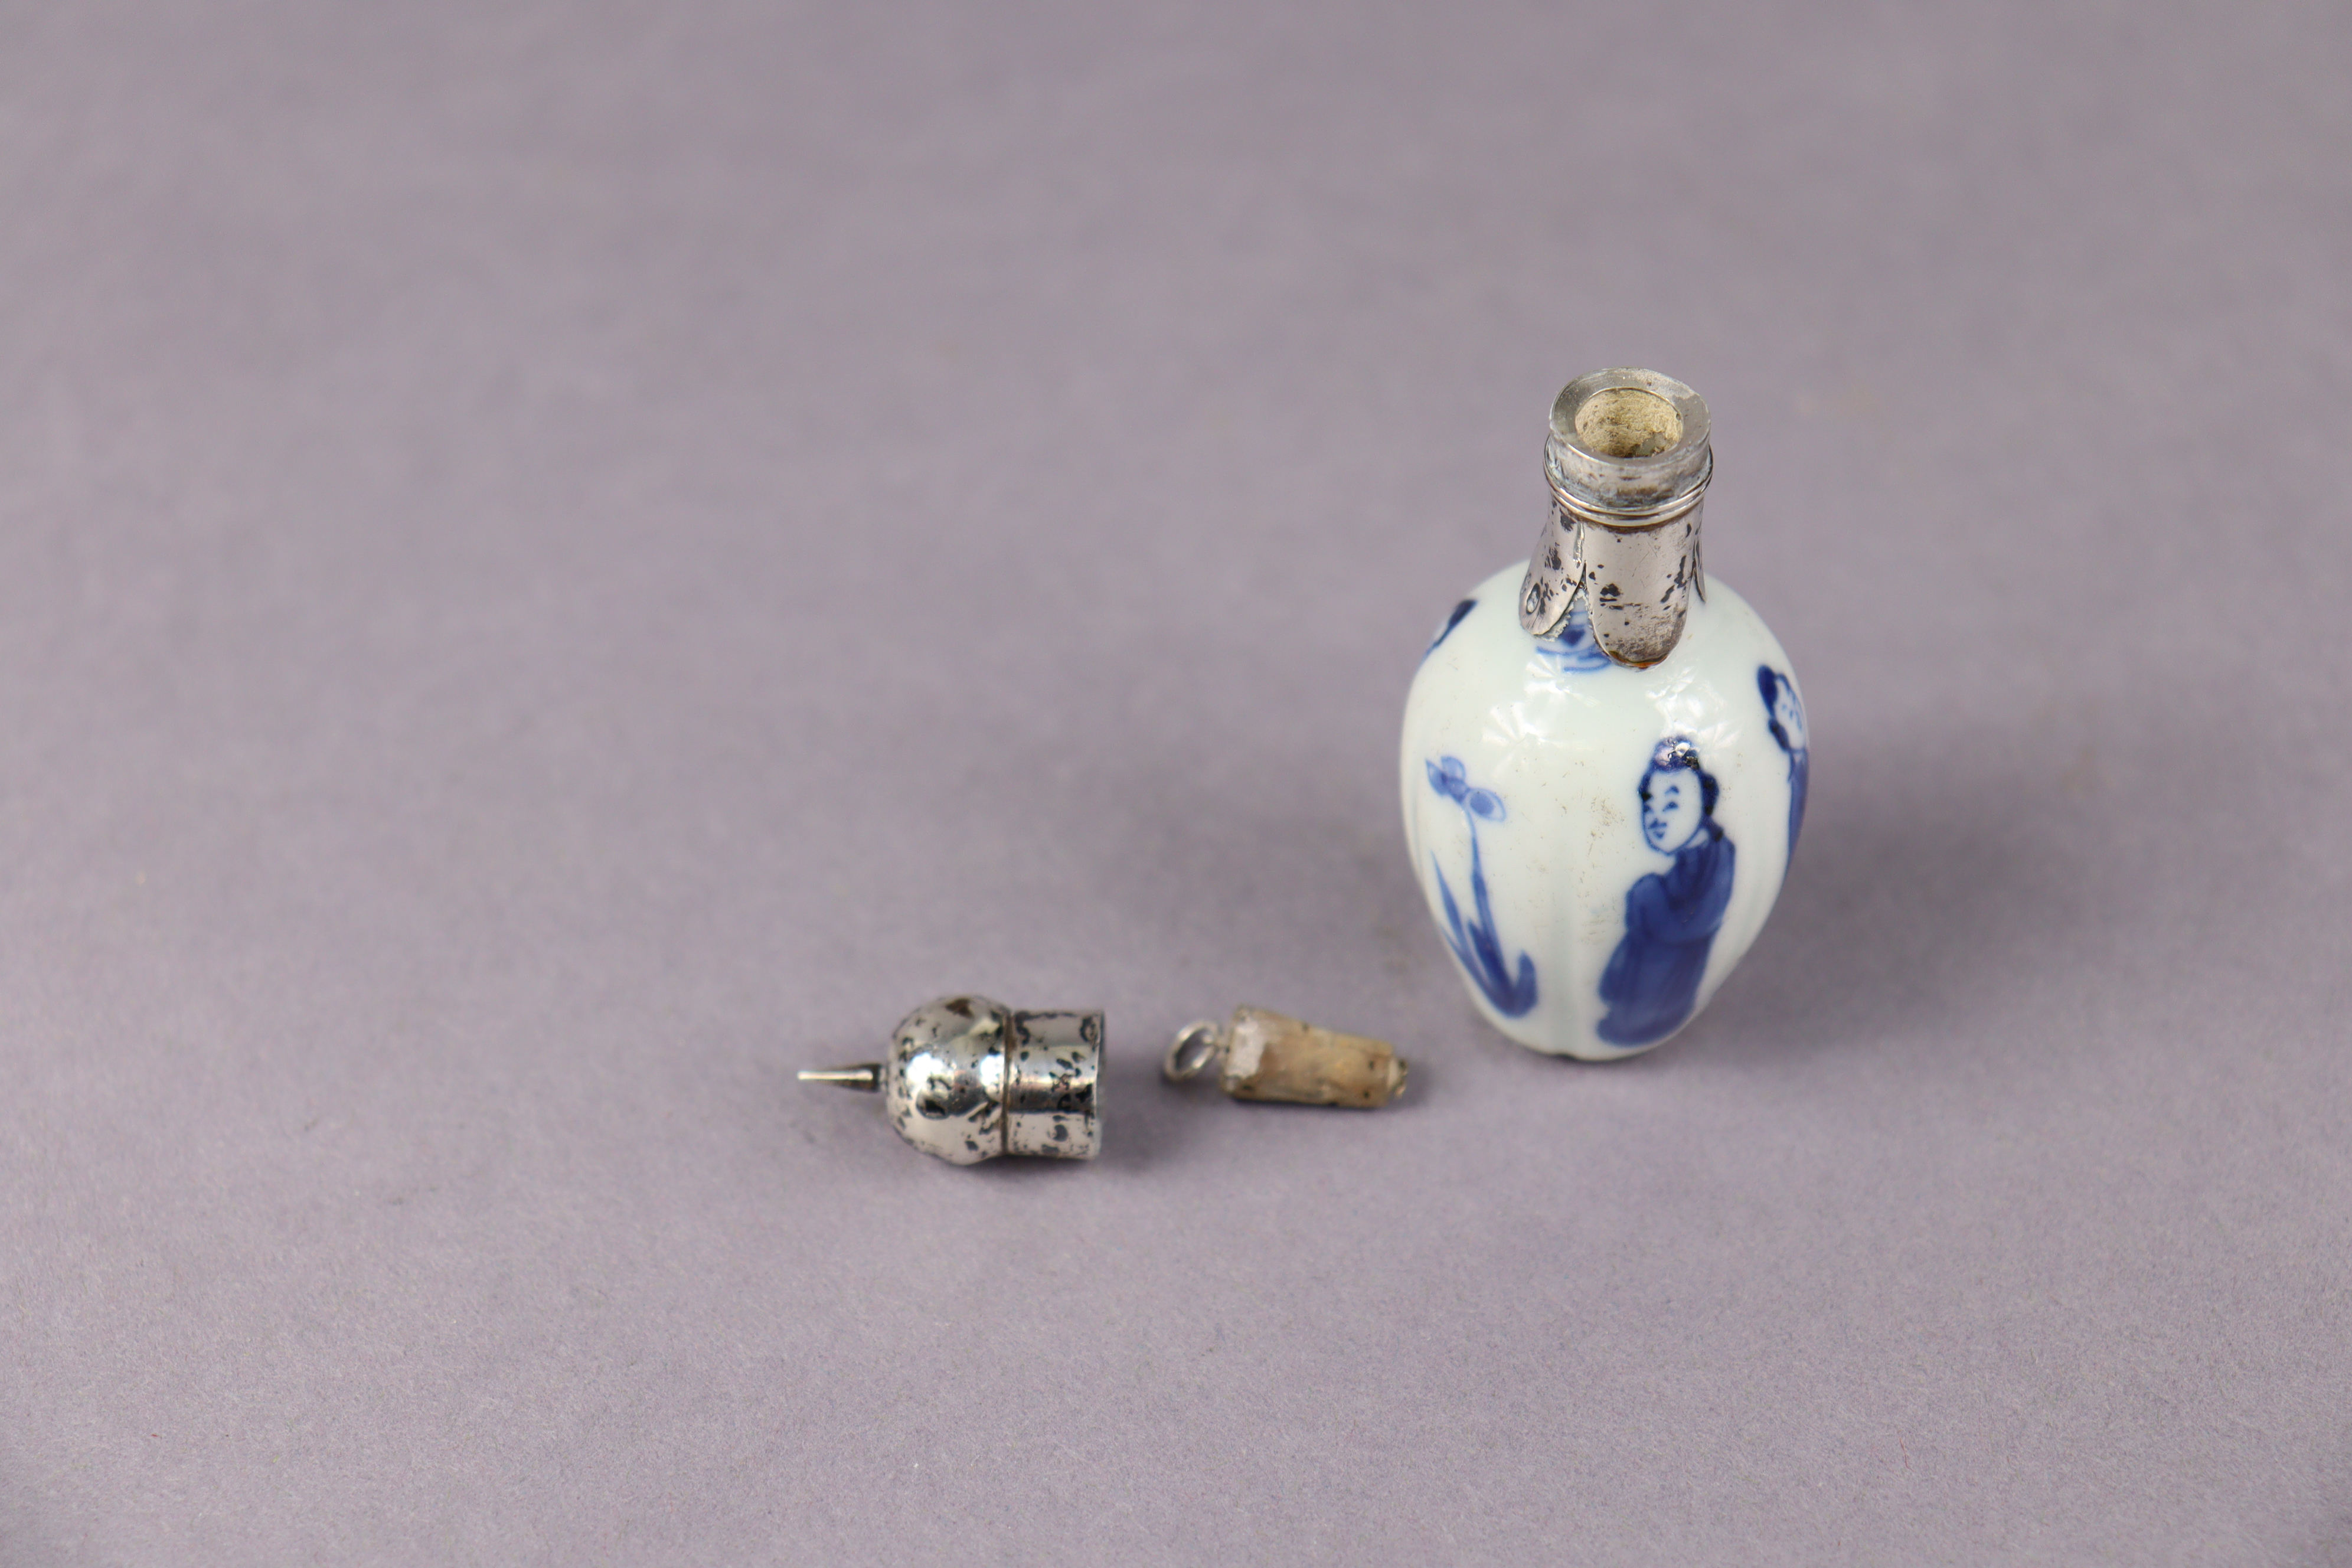 An early Chinese blue & white porcelain miniature lobed vase with standing figures & tall flowers, - Image 11 of 14